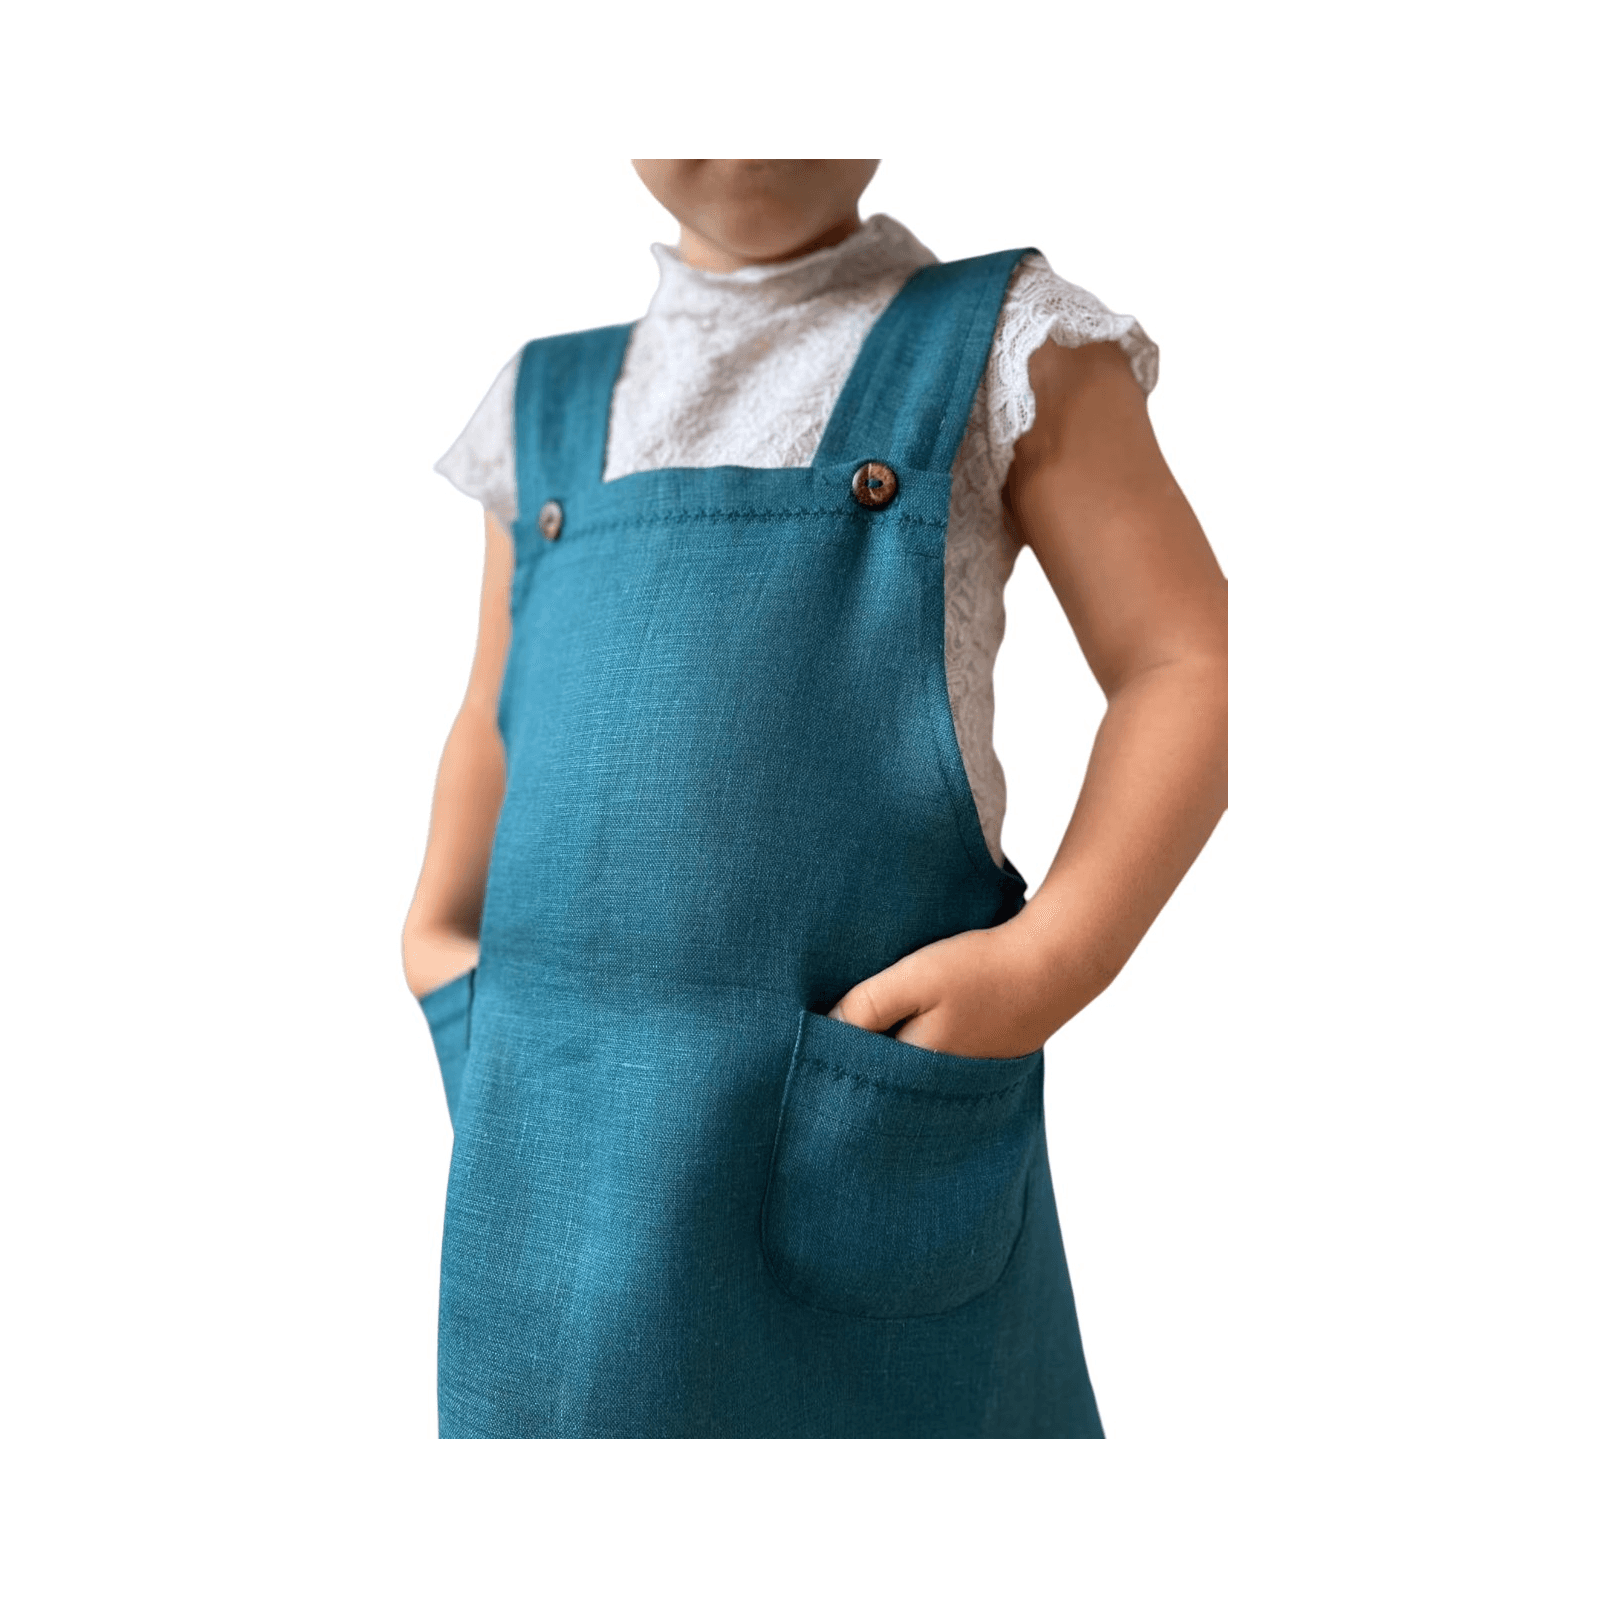 Montessori ForHomeAteliers Kids Linen Apron Cooking Teal Blue Size 2-4